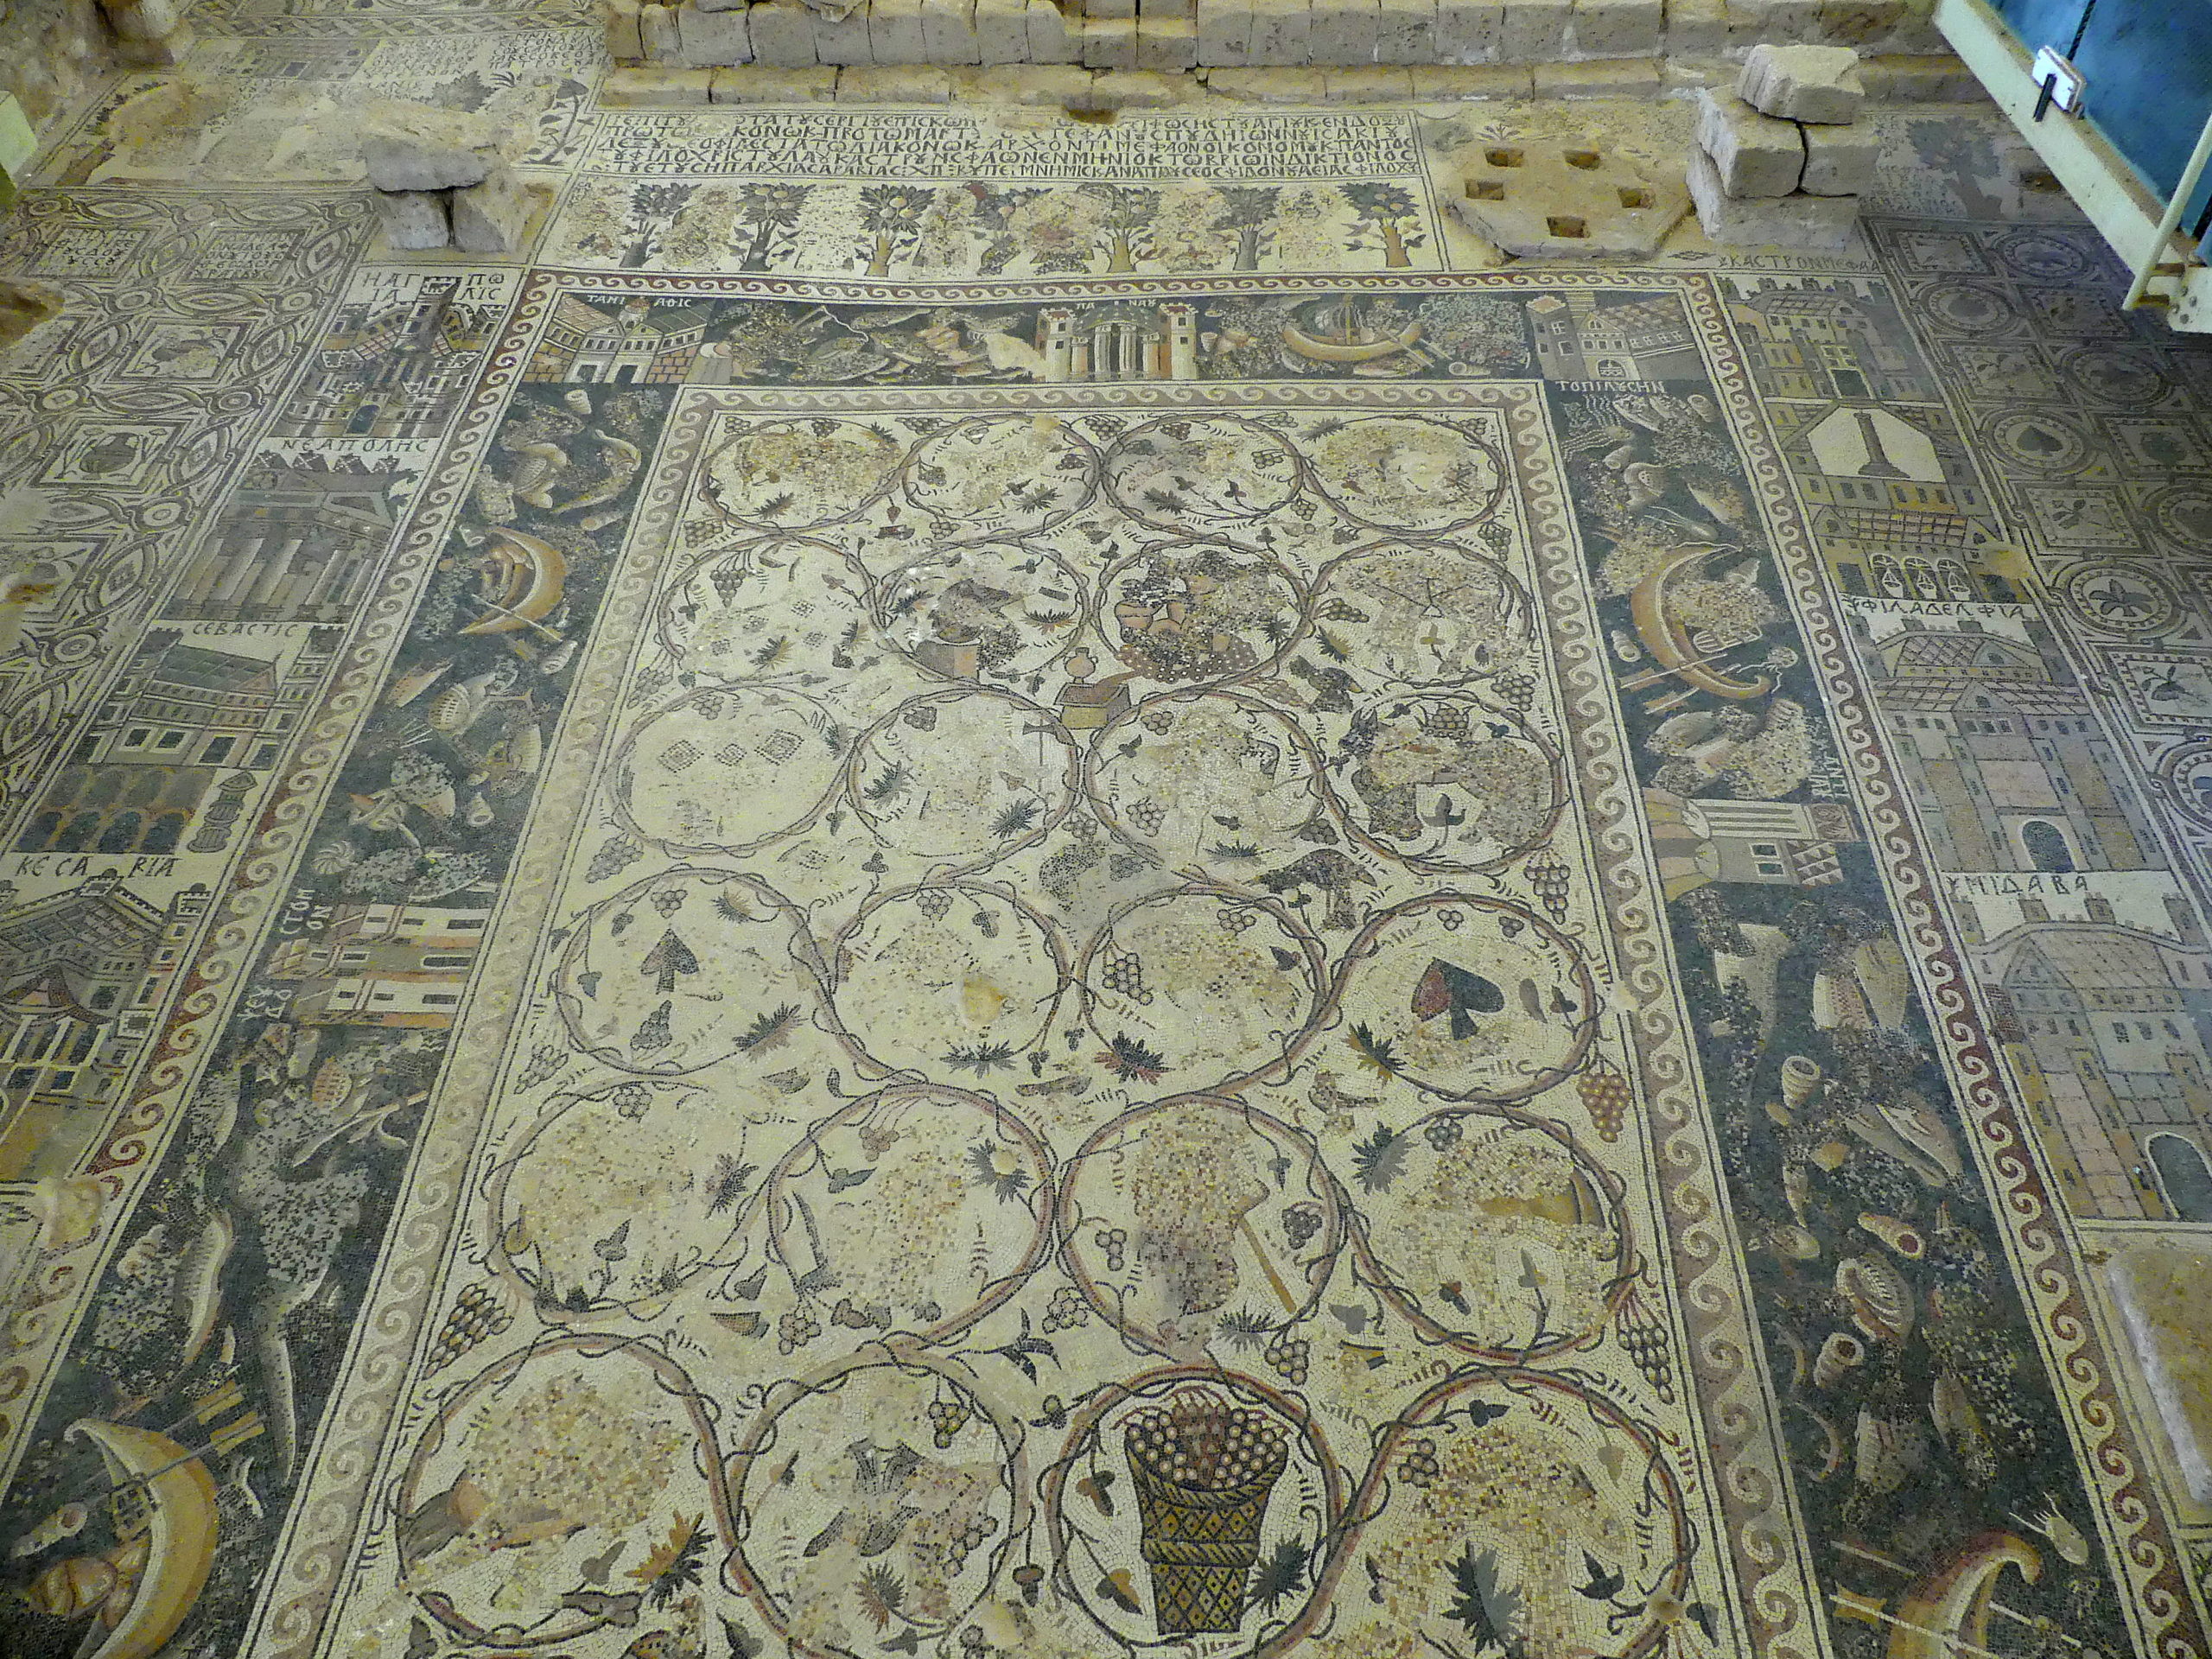 You are currently viewing Magical fragments: Byzantine & Umayyad Mosaics in Jordan